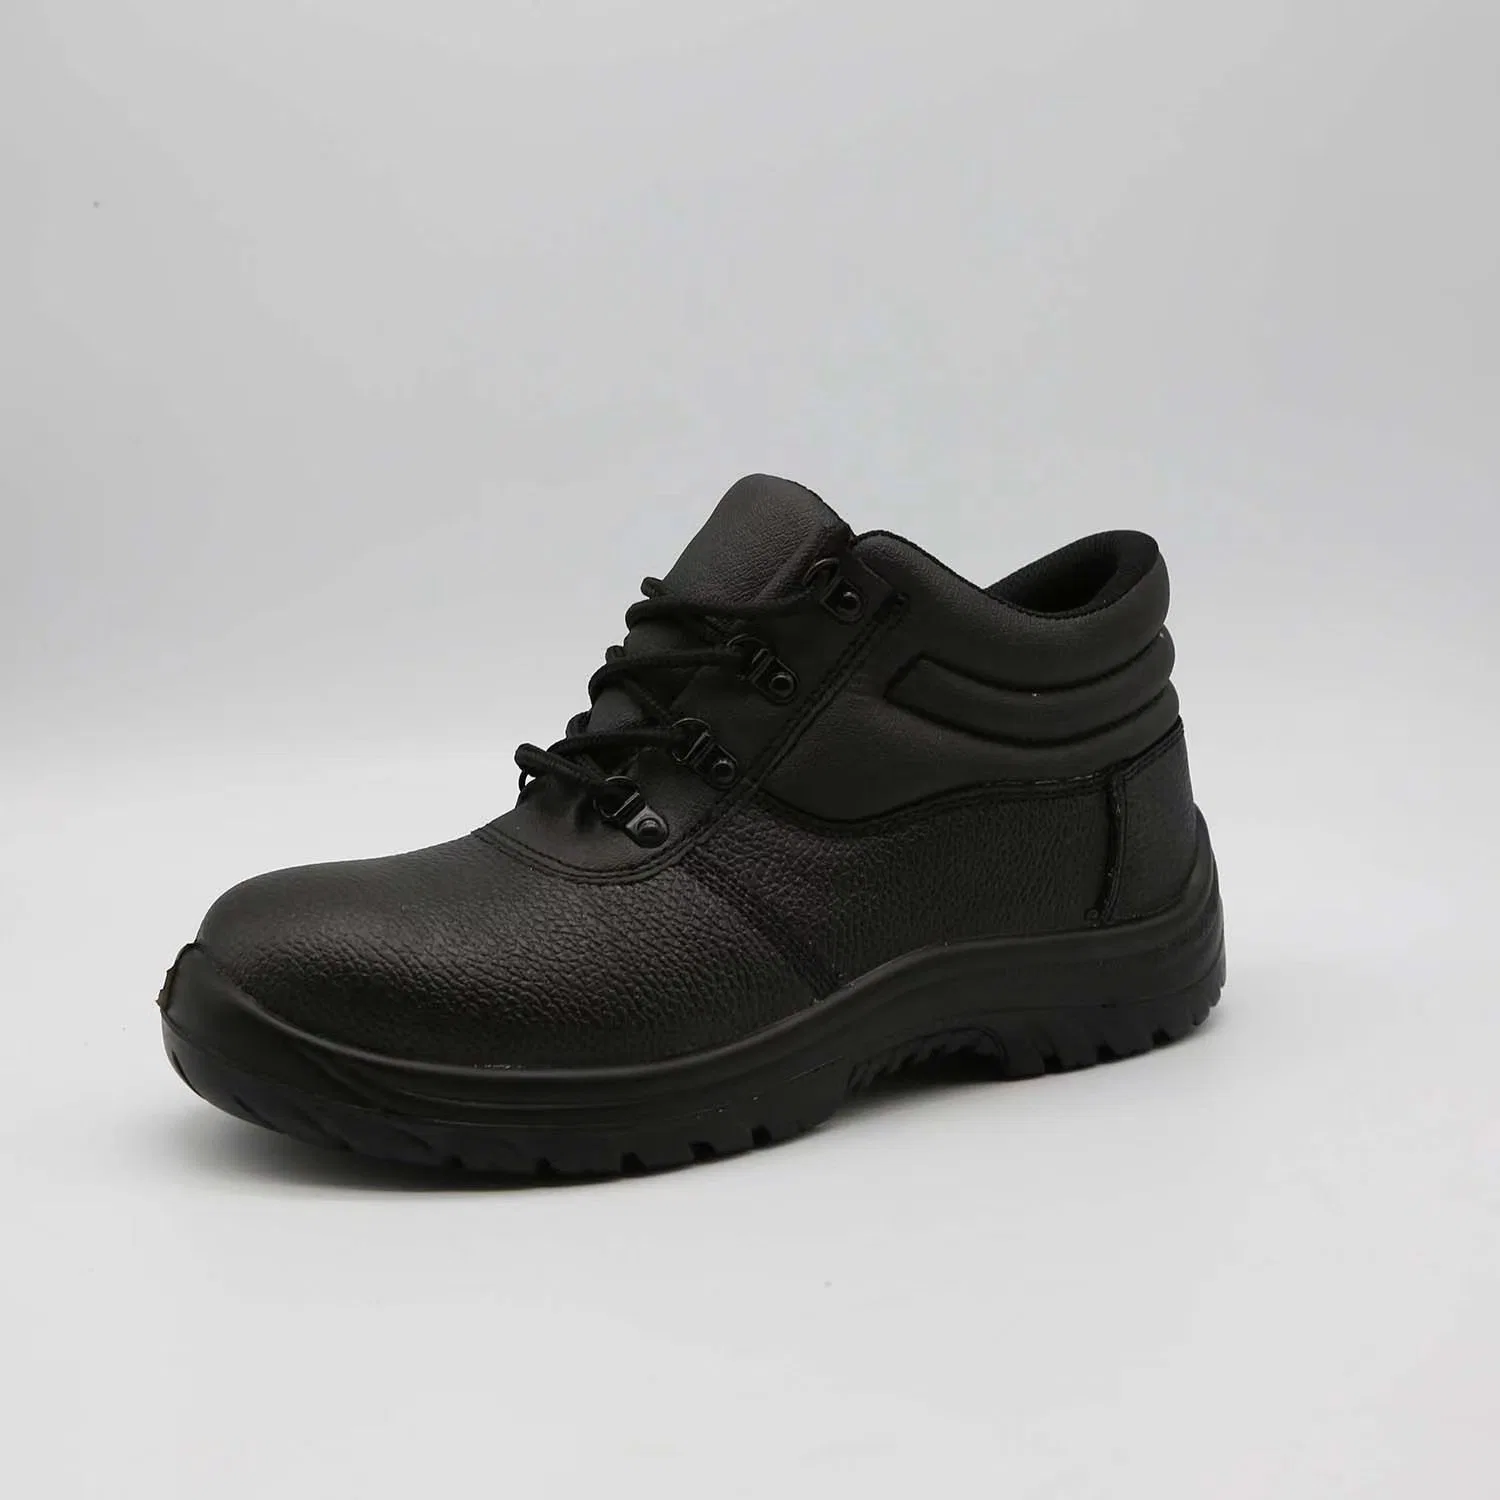 Leather Shoes Work Shoes Safety Footwear Shoes